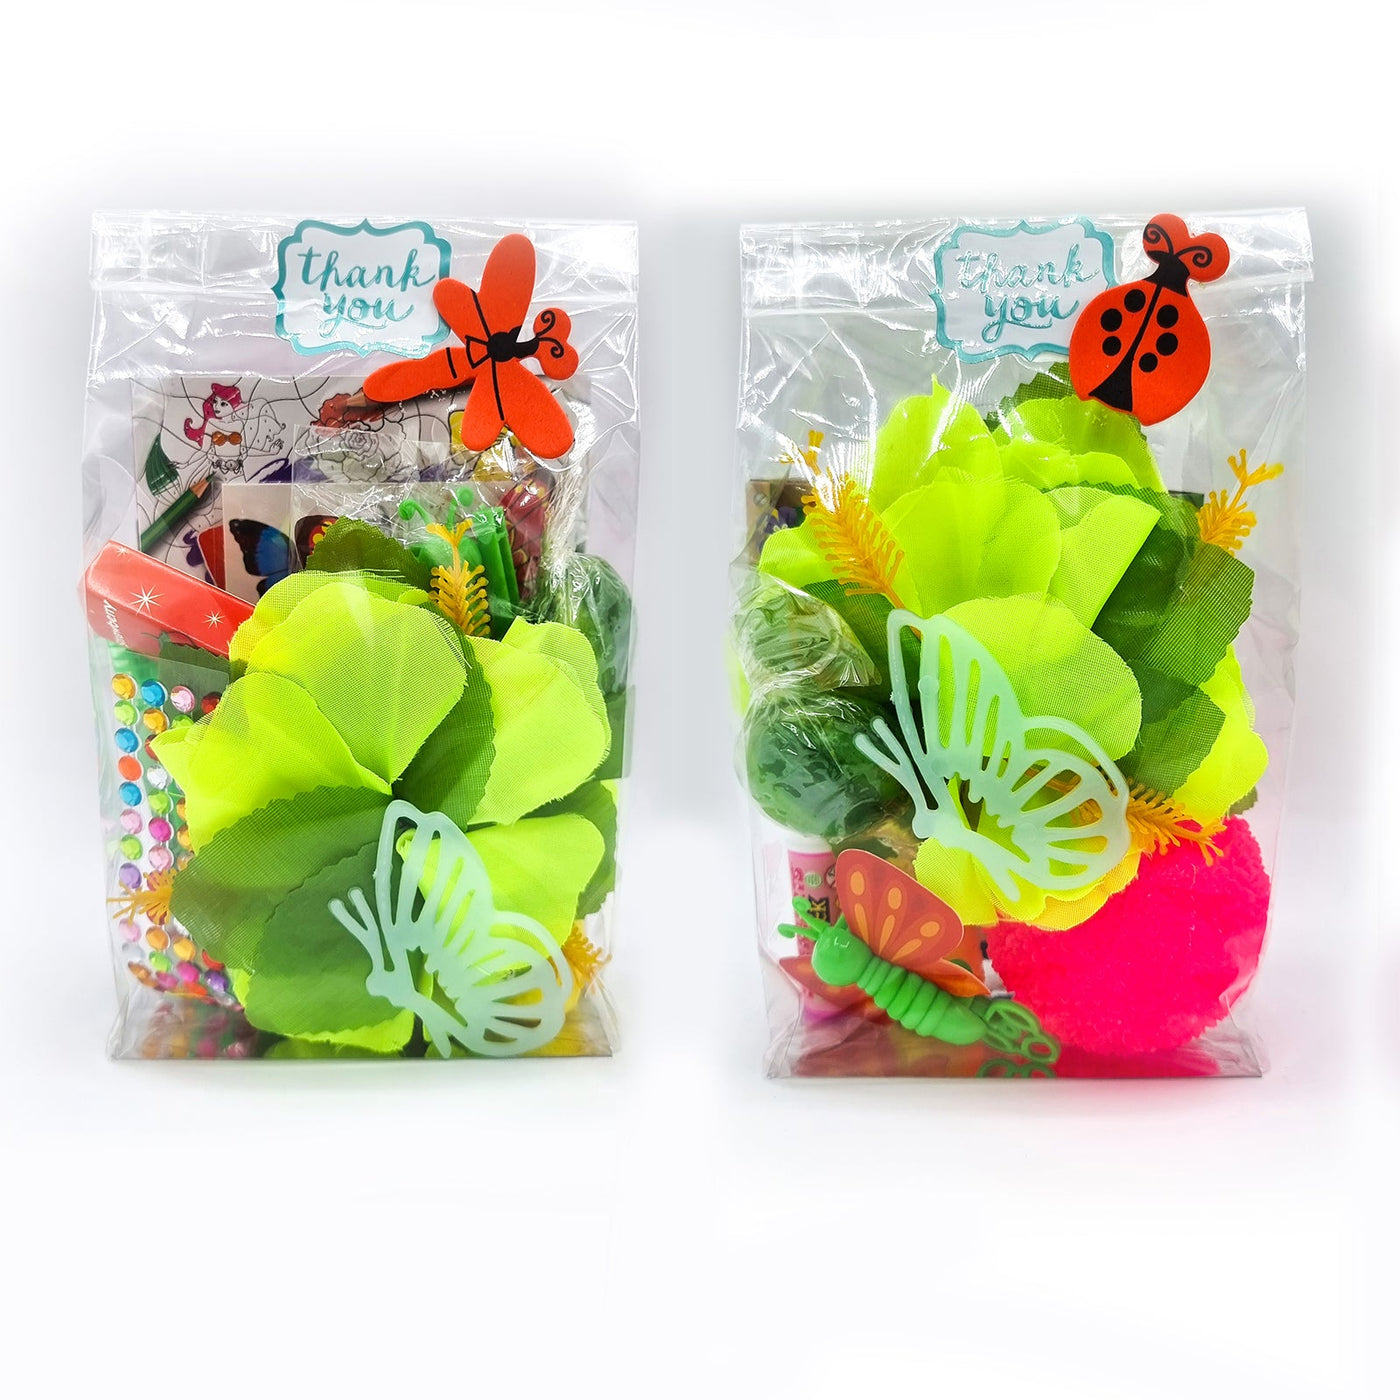 Ready Made Girls Neon Glow Flower Butterfly Garden Party Goody Bags With Toys And Sweets, Party Favours.